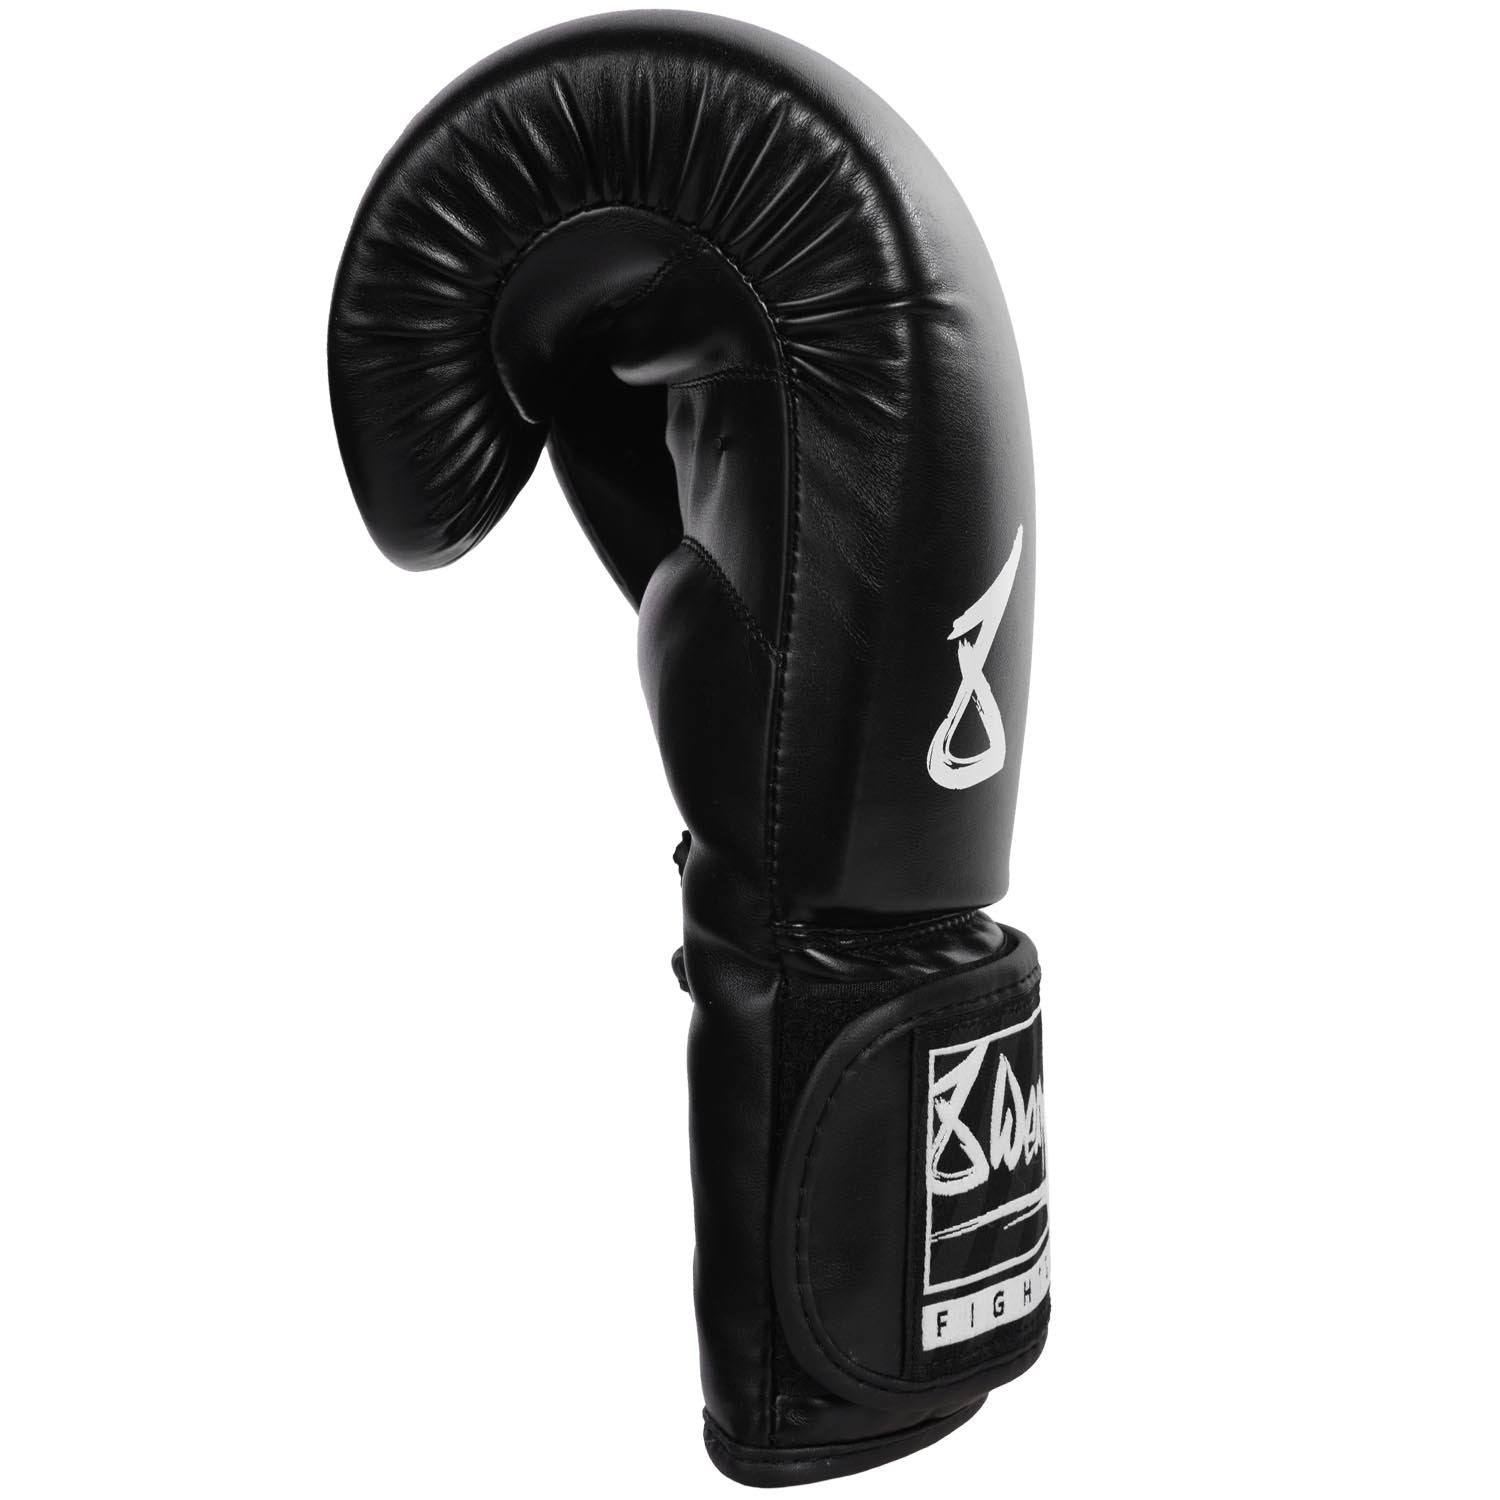 8 WEAPONS Boxing Gloves, Pure, black-white 8 WEAPONS